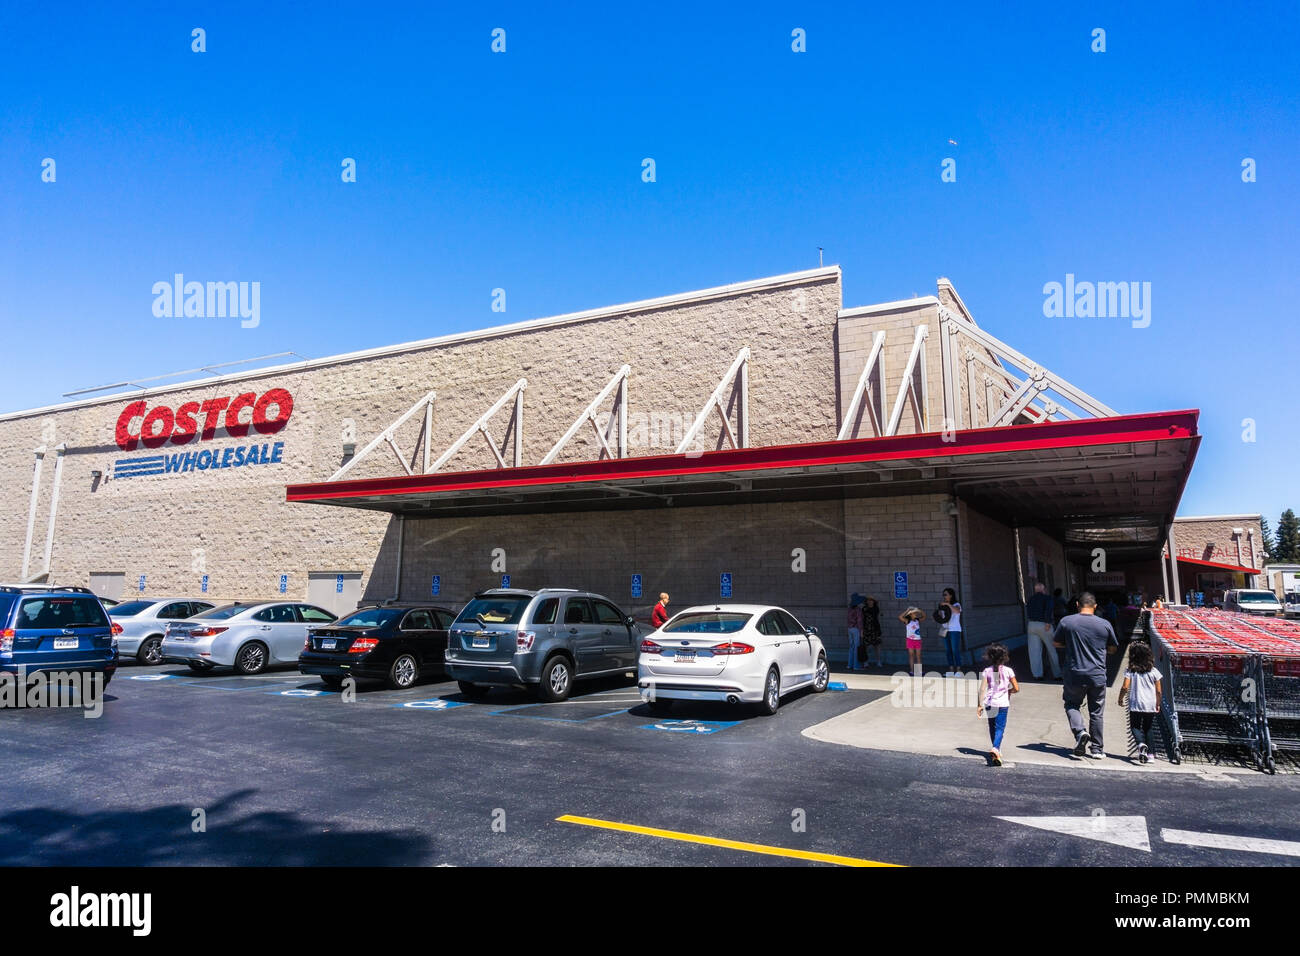 August 6, 2018 Mountain View / CA / USA - Exterior view of one of the Costco Wholesale stores in south San Francisco bay area; People walking towards Stock Photo